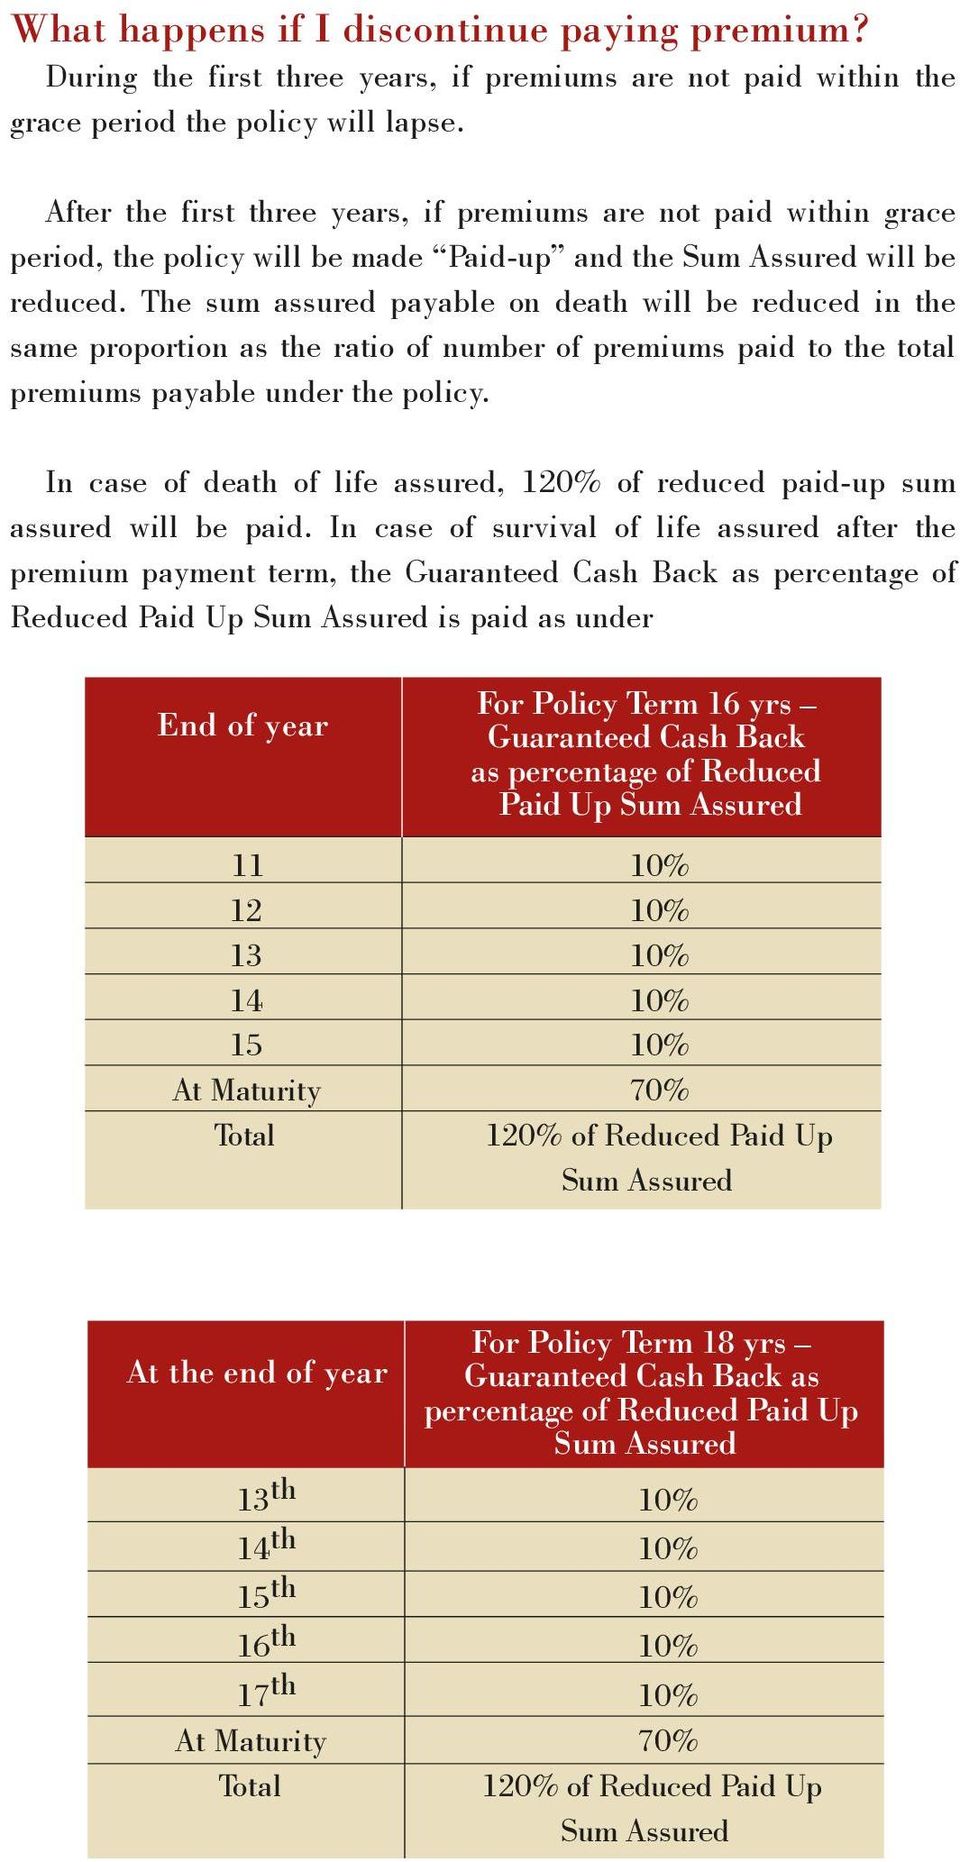 The sum assured payable on death will be reduced in the same proportion as the ratio of number of premiums paid to the total premiums payable under the policy.